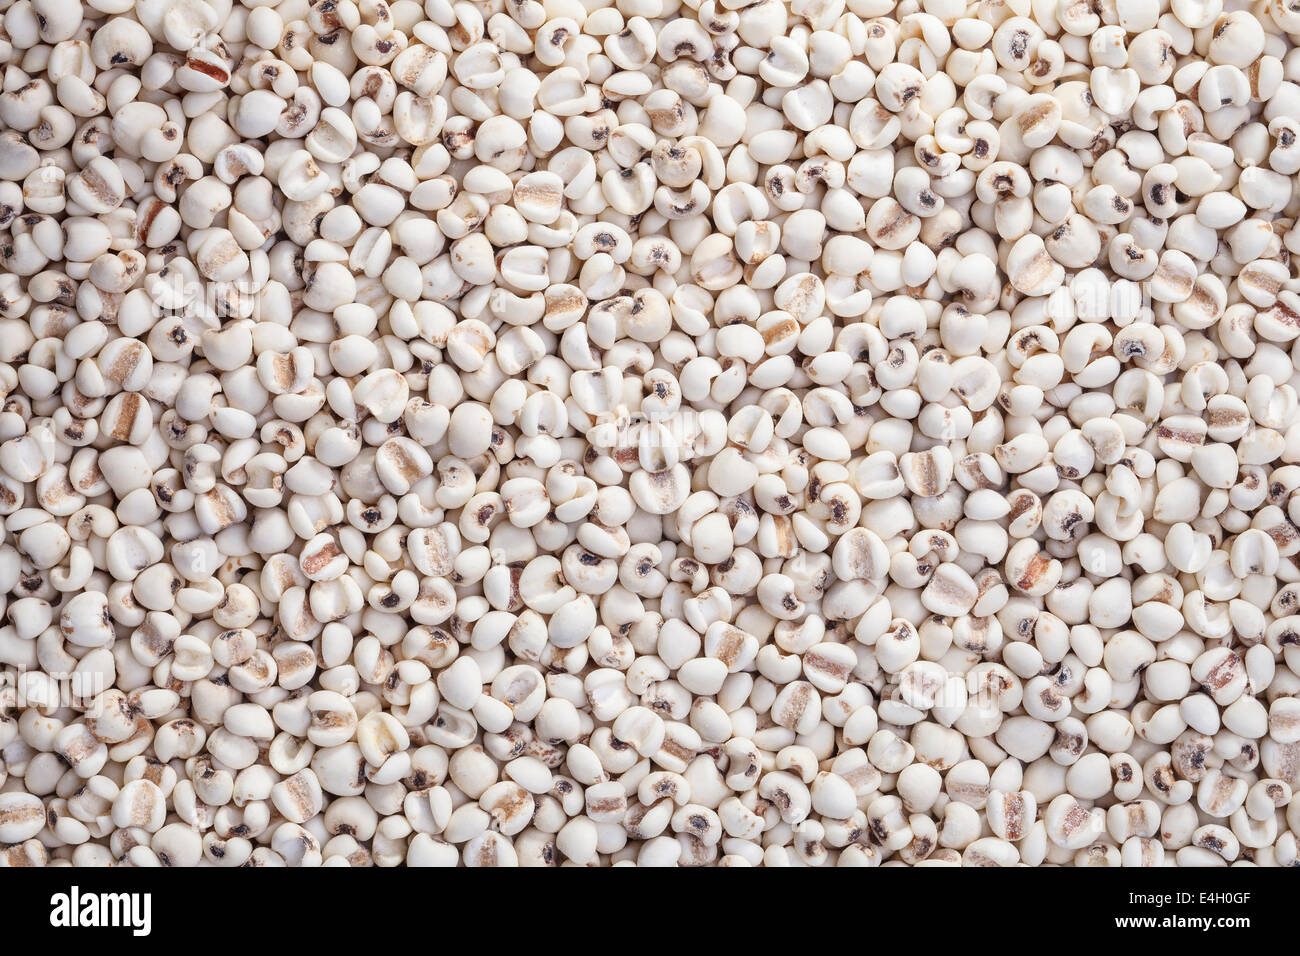 Millets the organic grain food arranges as background Stock Photo